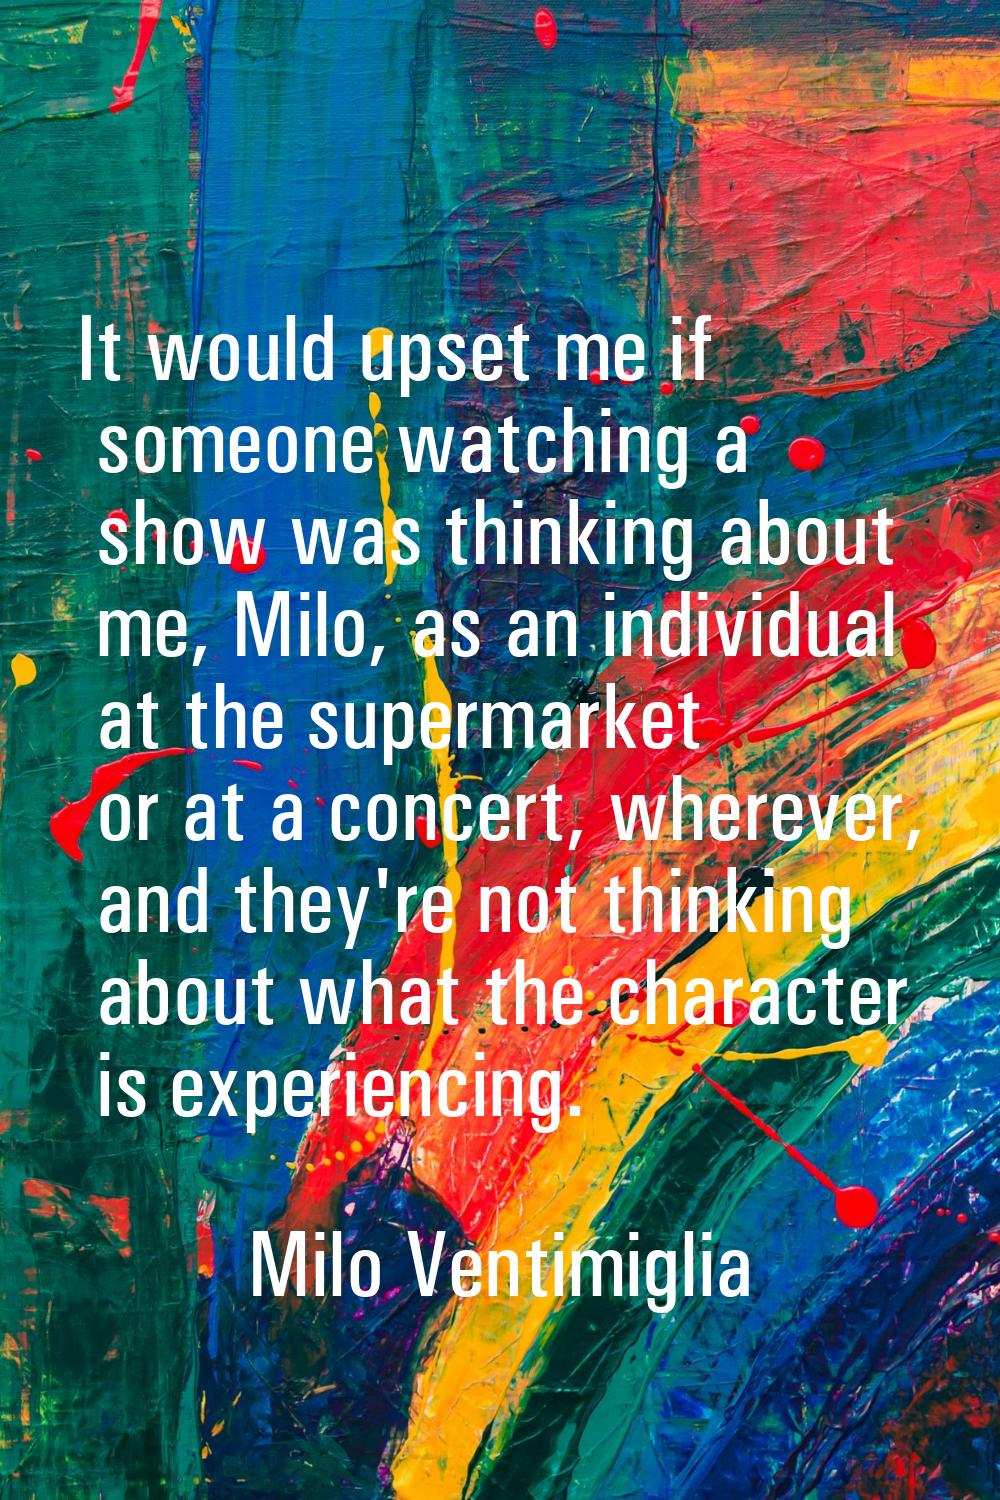 It would upset me if someone watching a show was thinking about me, Milo, as an individual at the s